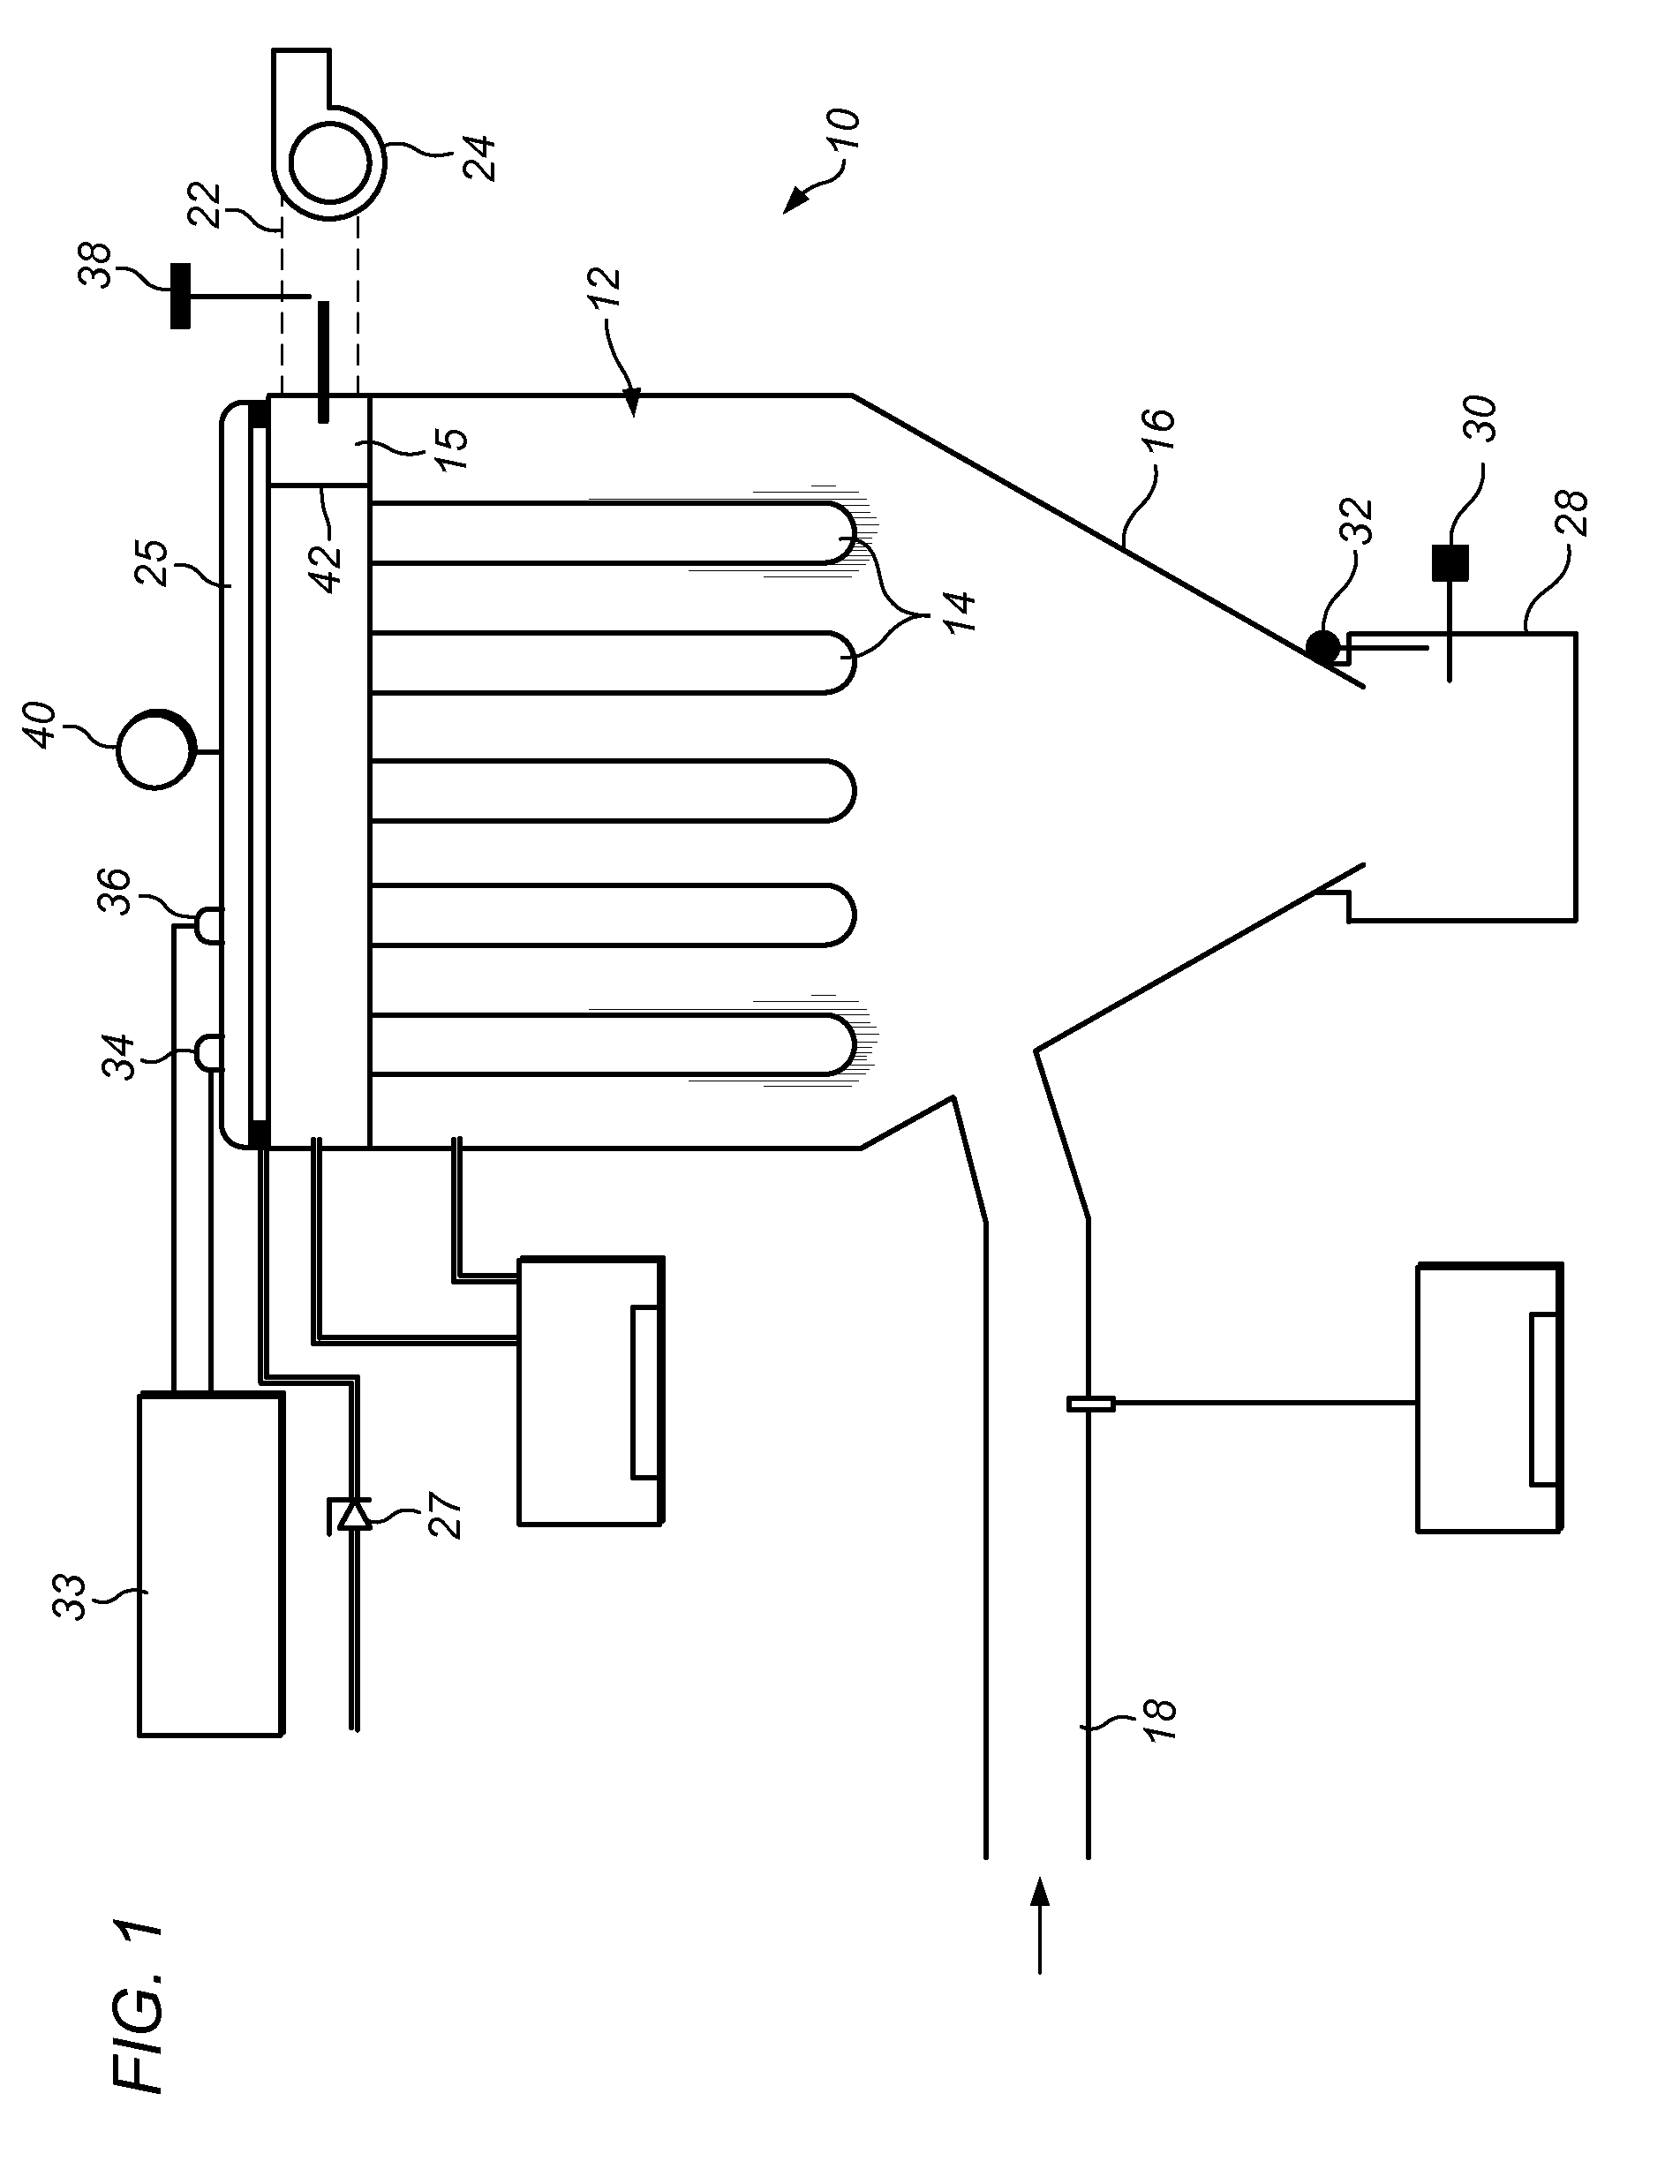 Dust collector control system